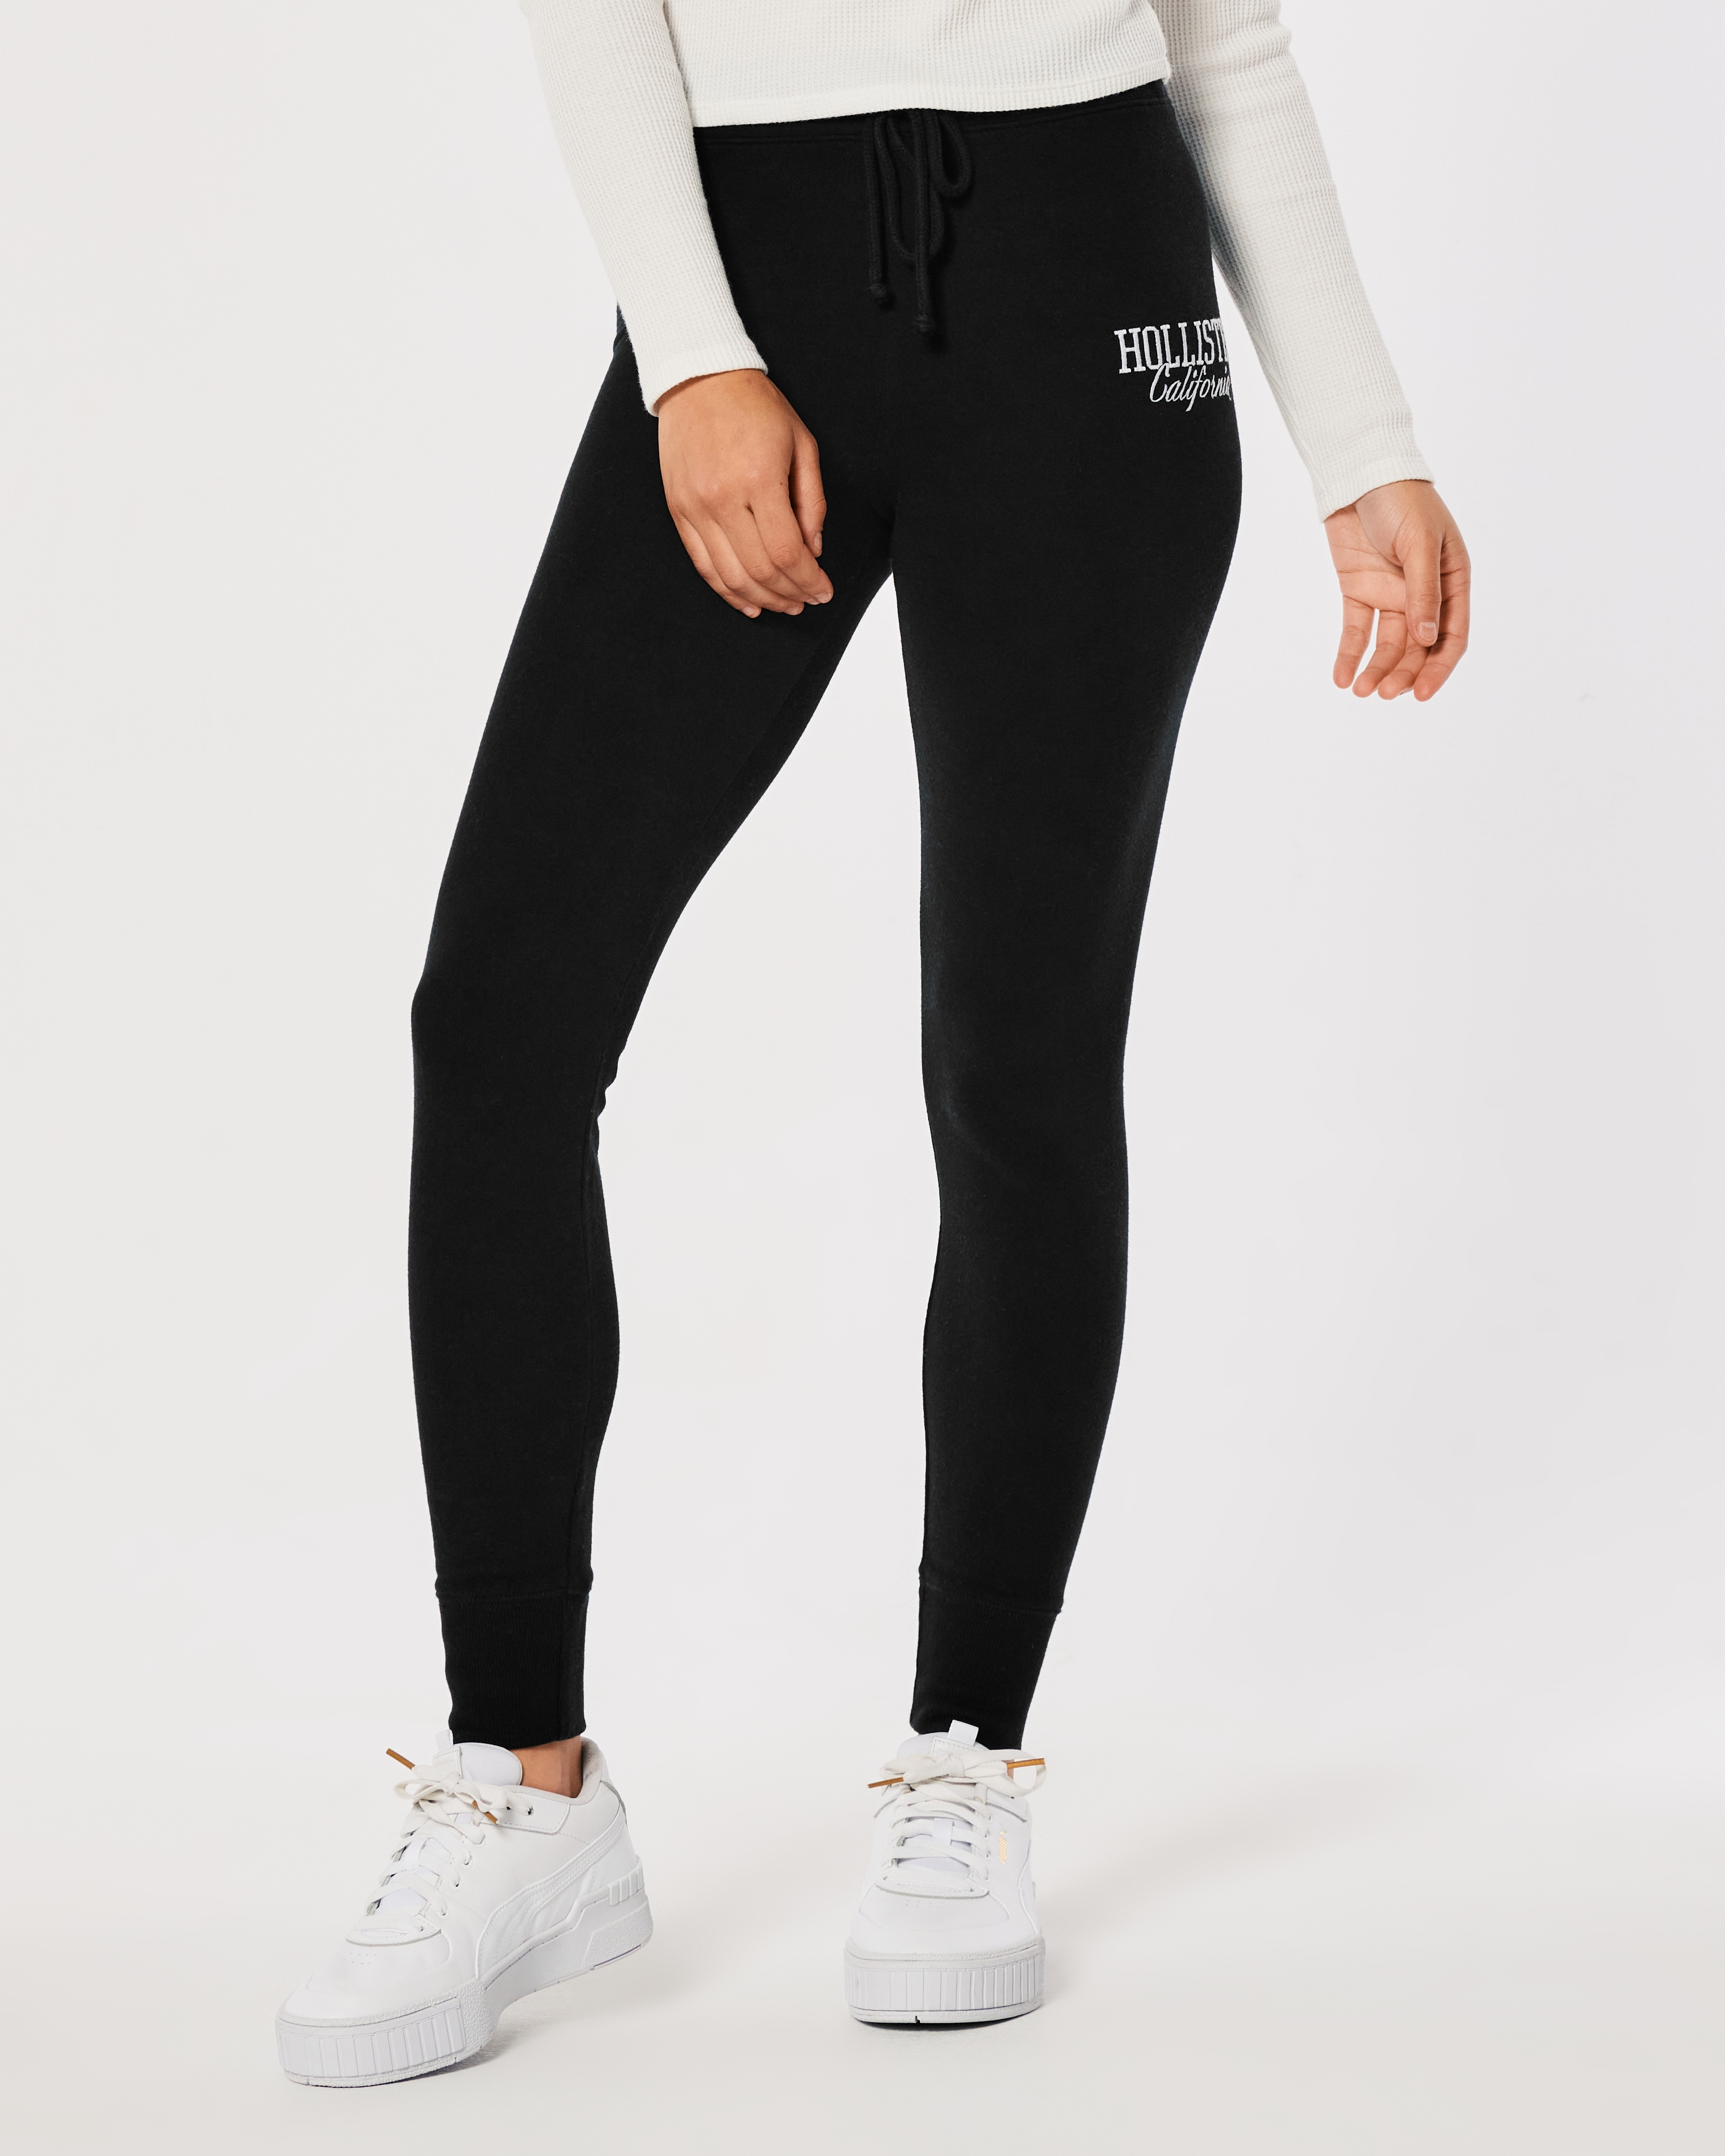 Hollister Leggings & Churidars for Women sale - discounted price